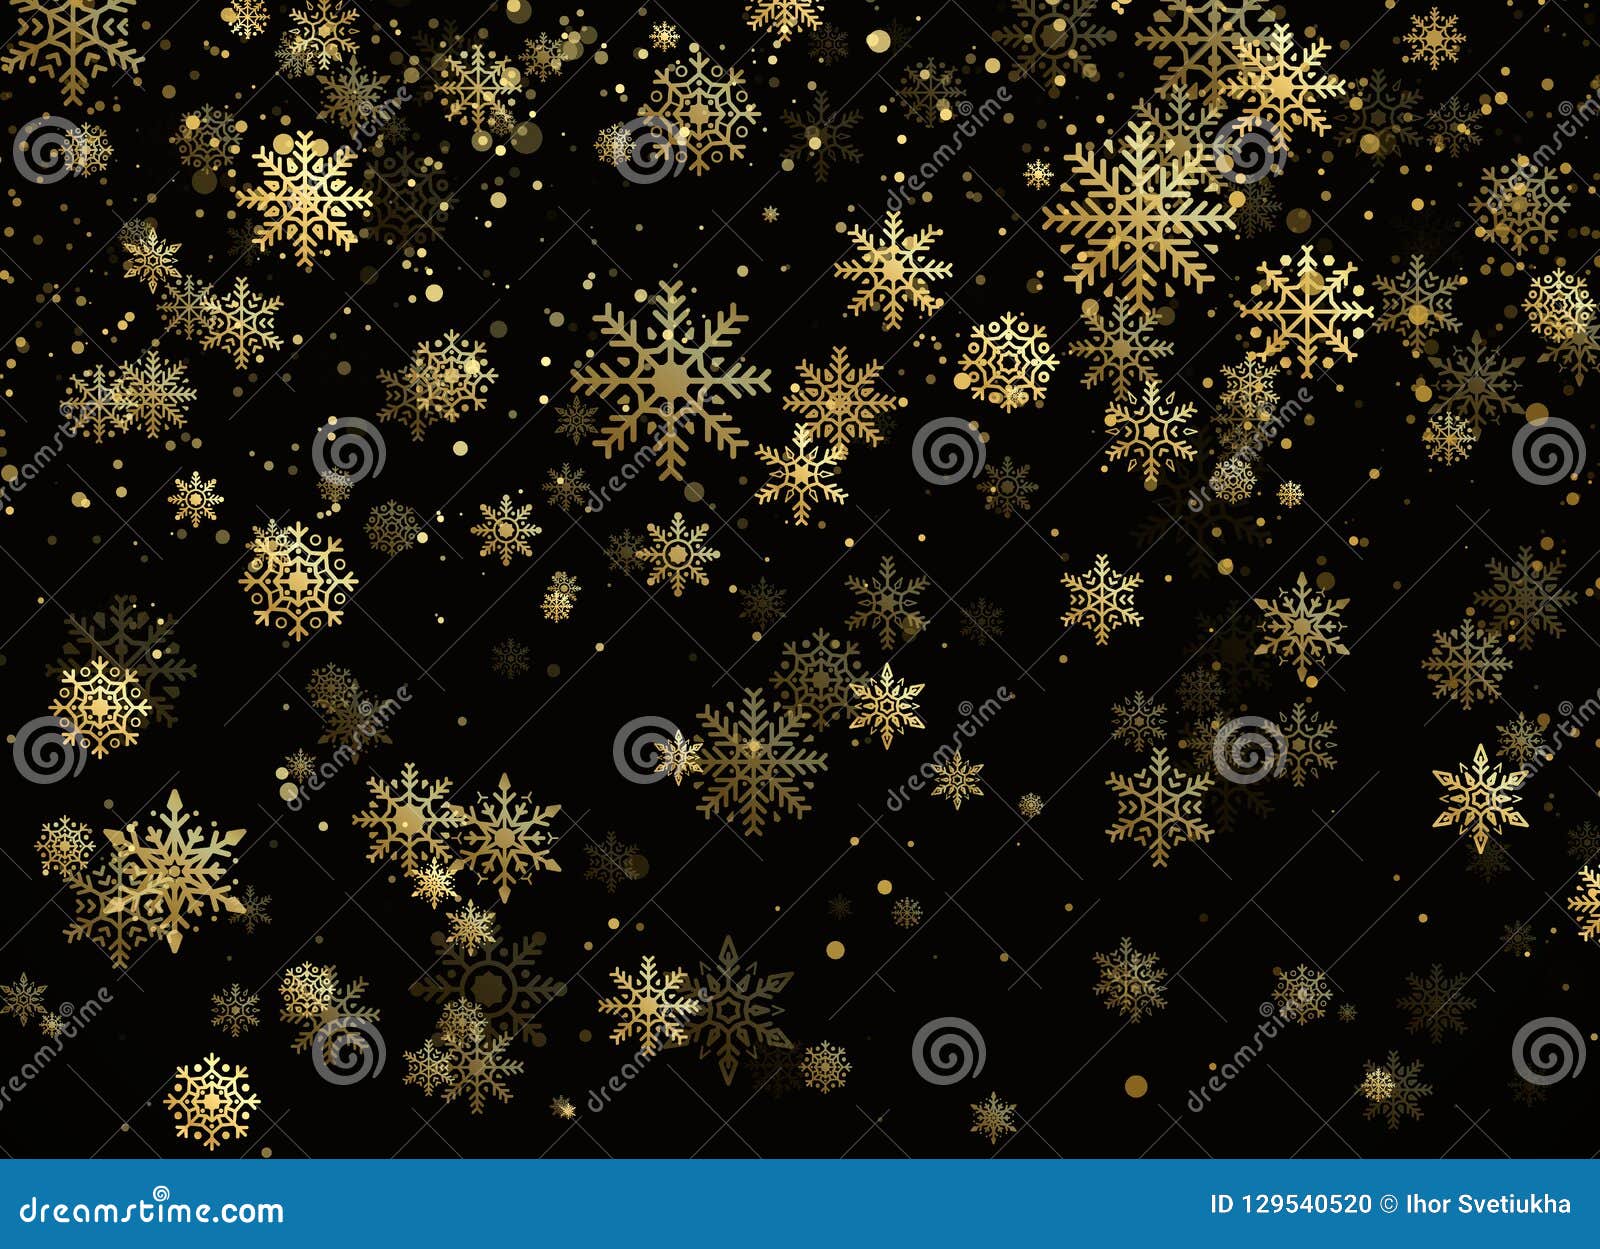 Falling Gold Snowflakes. Golden Snowfall. New Year and Christmas ...